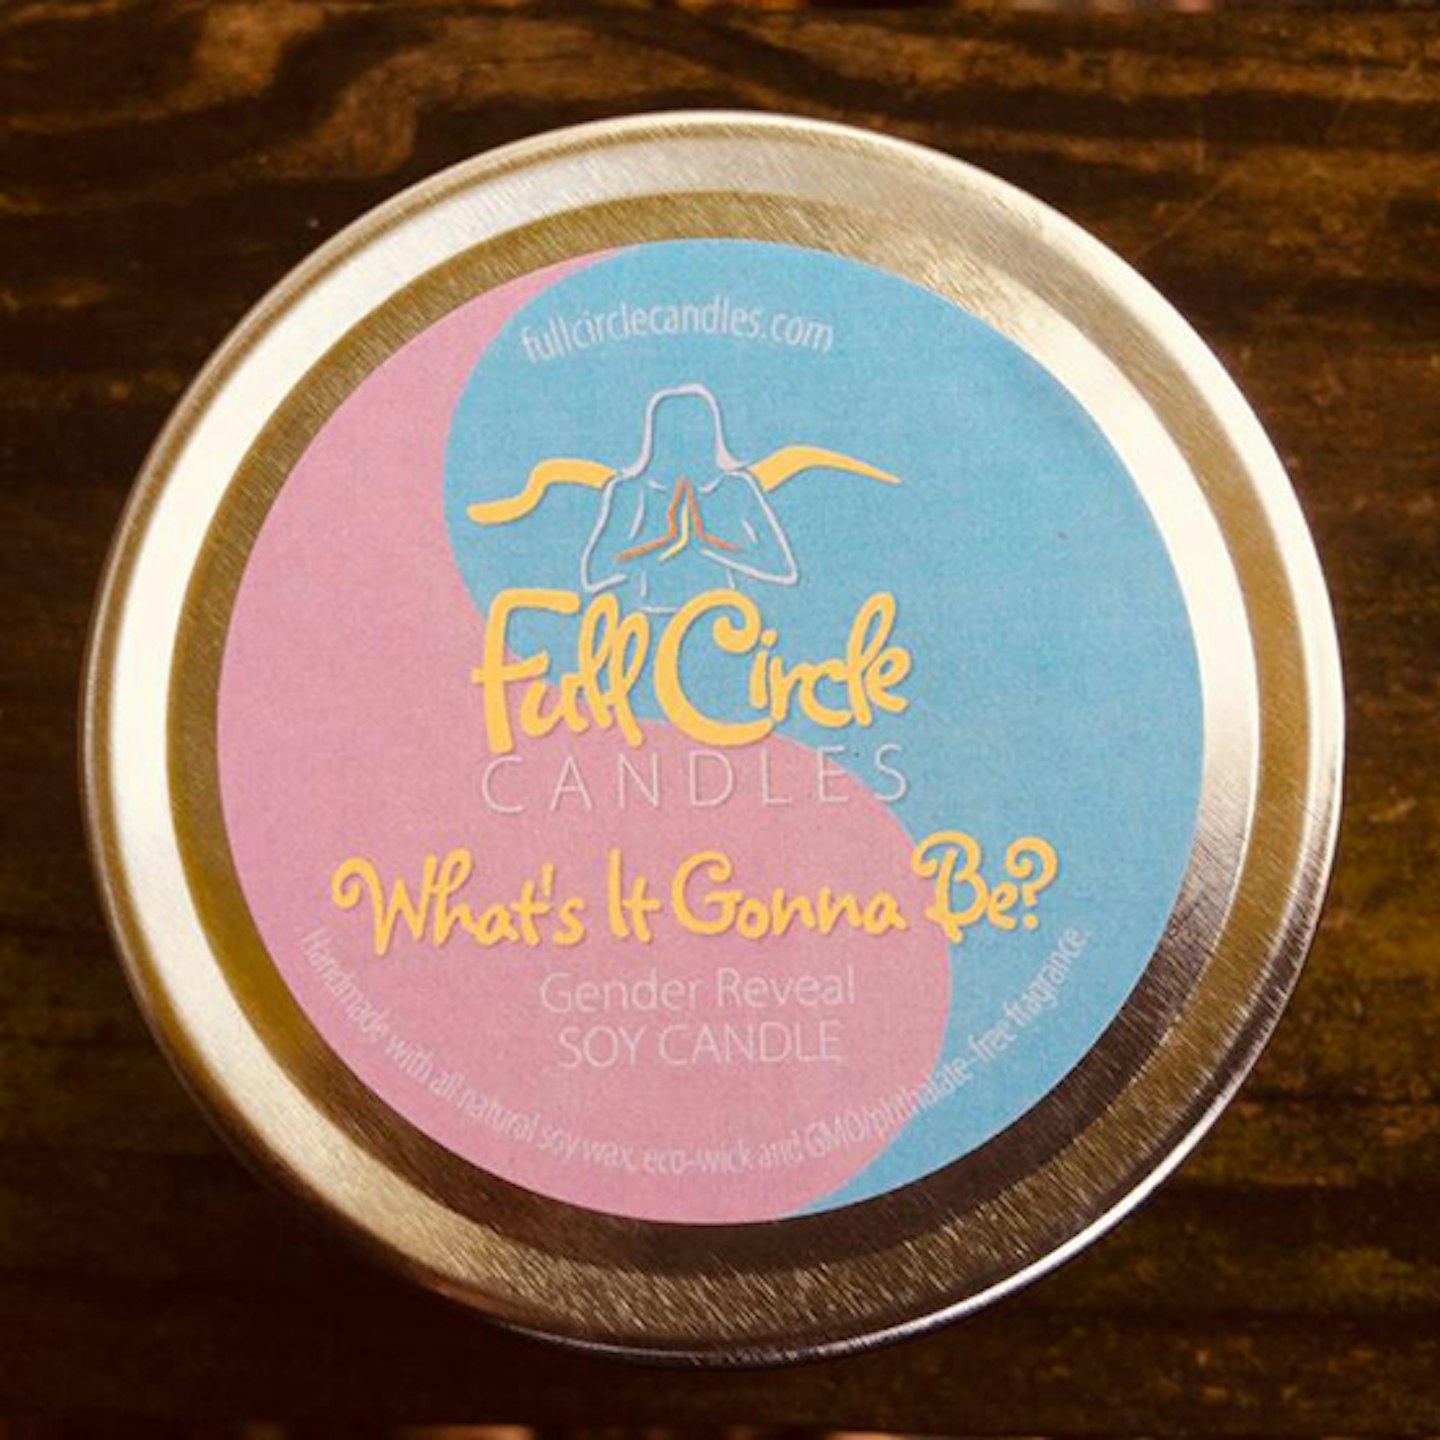 Gender Reveal Soy Candle